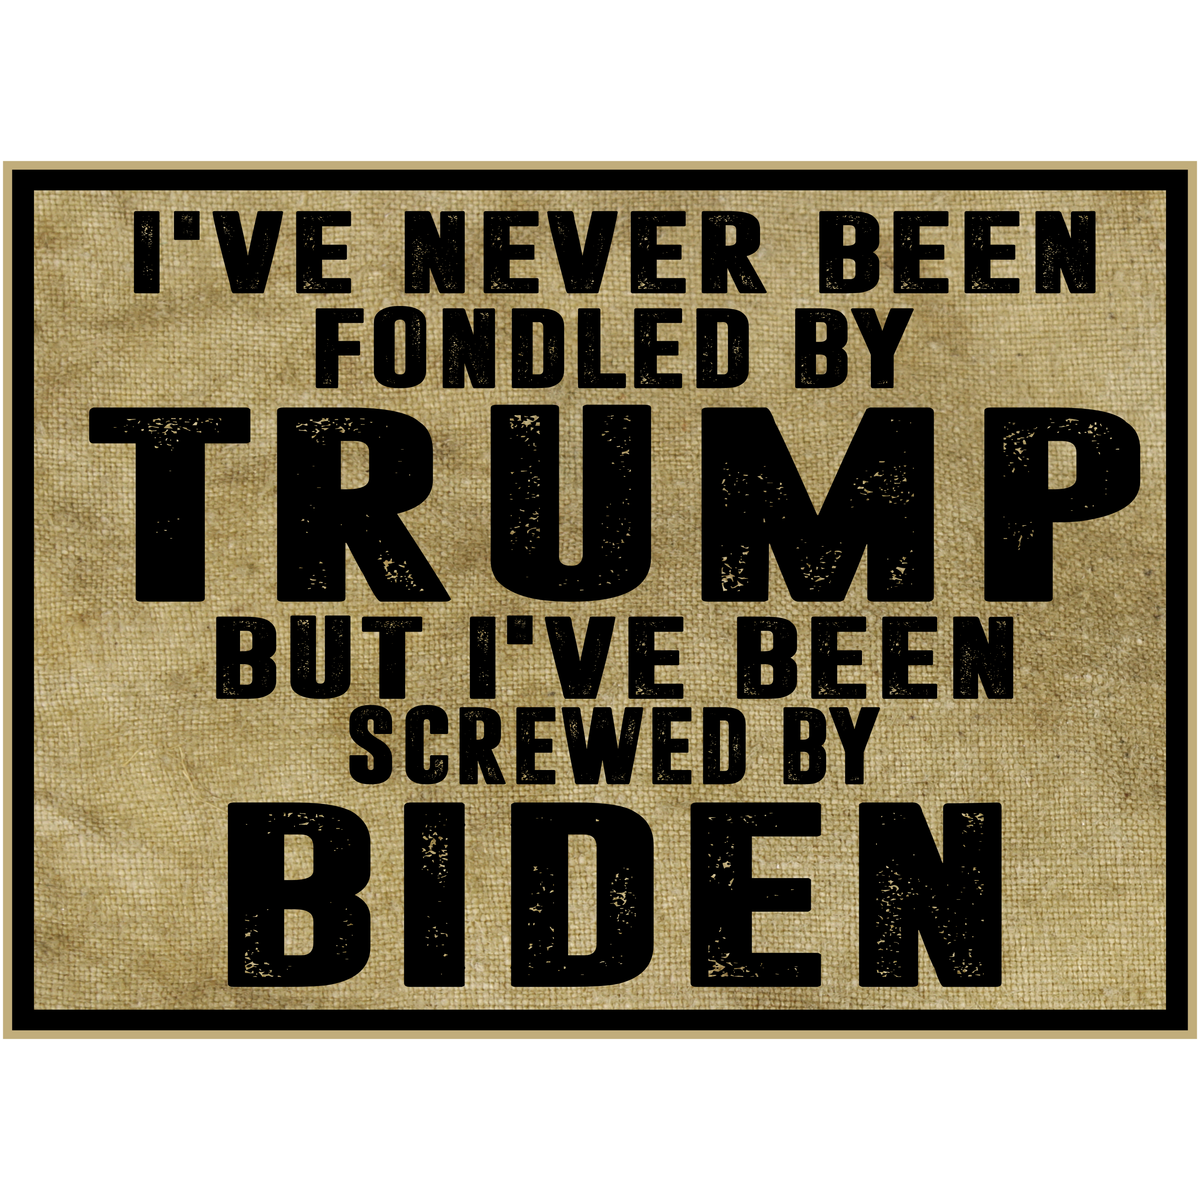 I've Never Been Fondled by Trump - Screwed by Biden - PermaSticker - Free Shipping - Application Video in Description